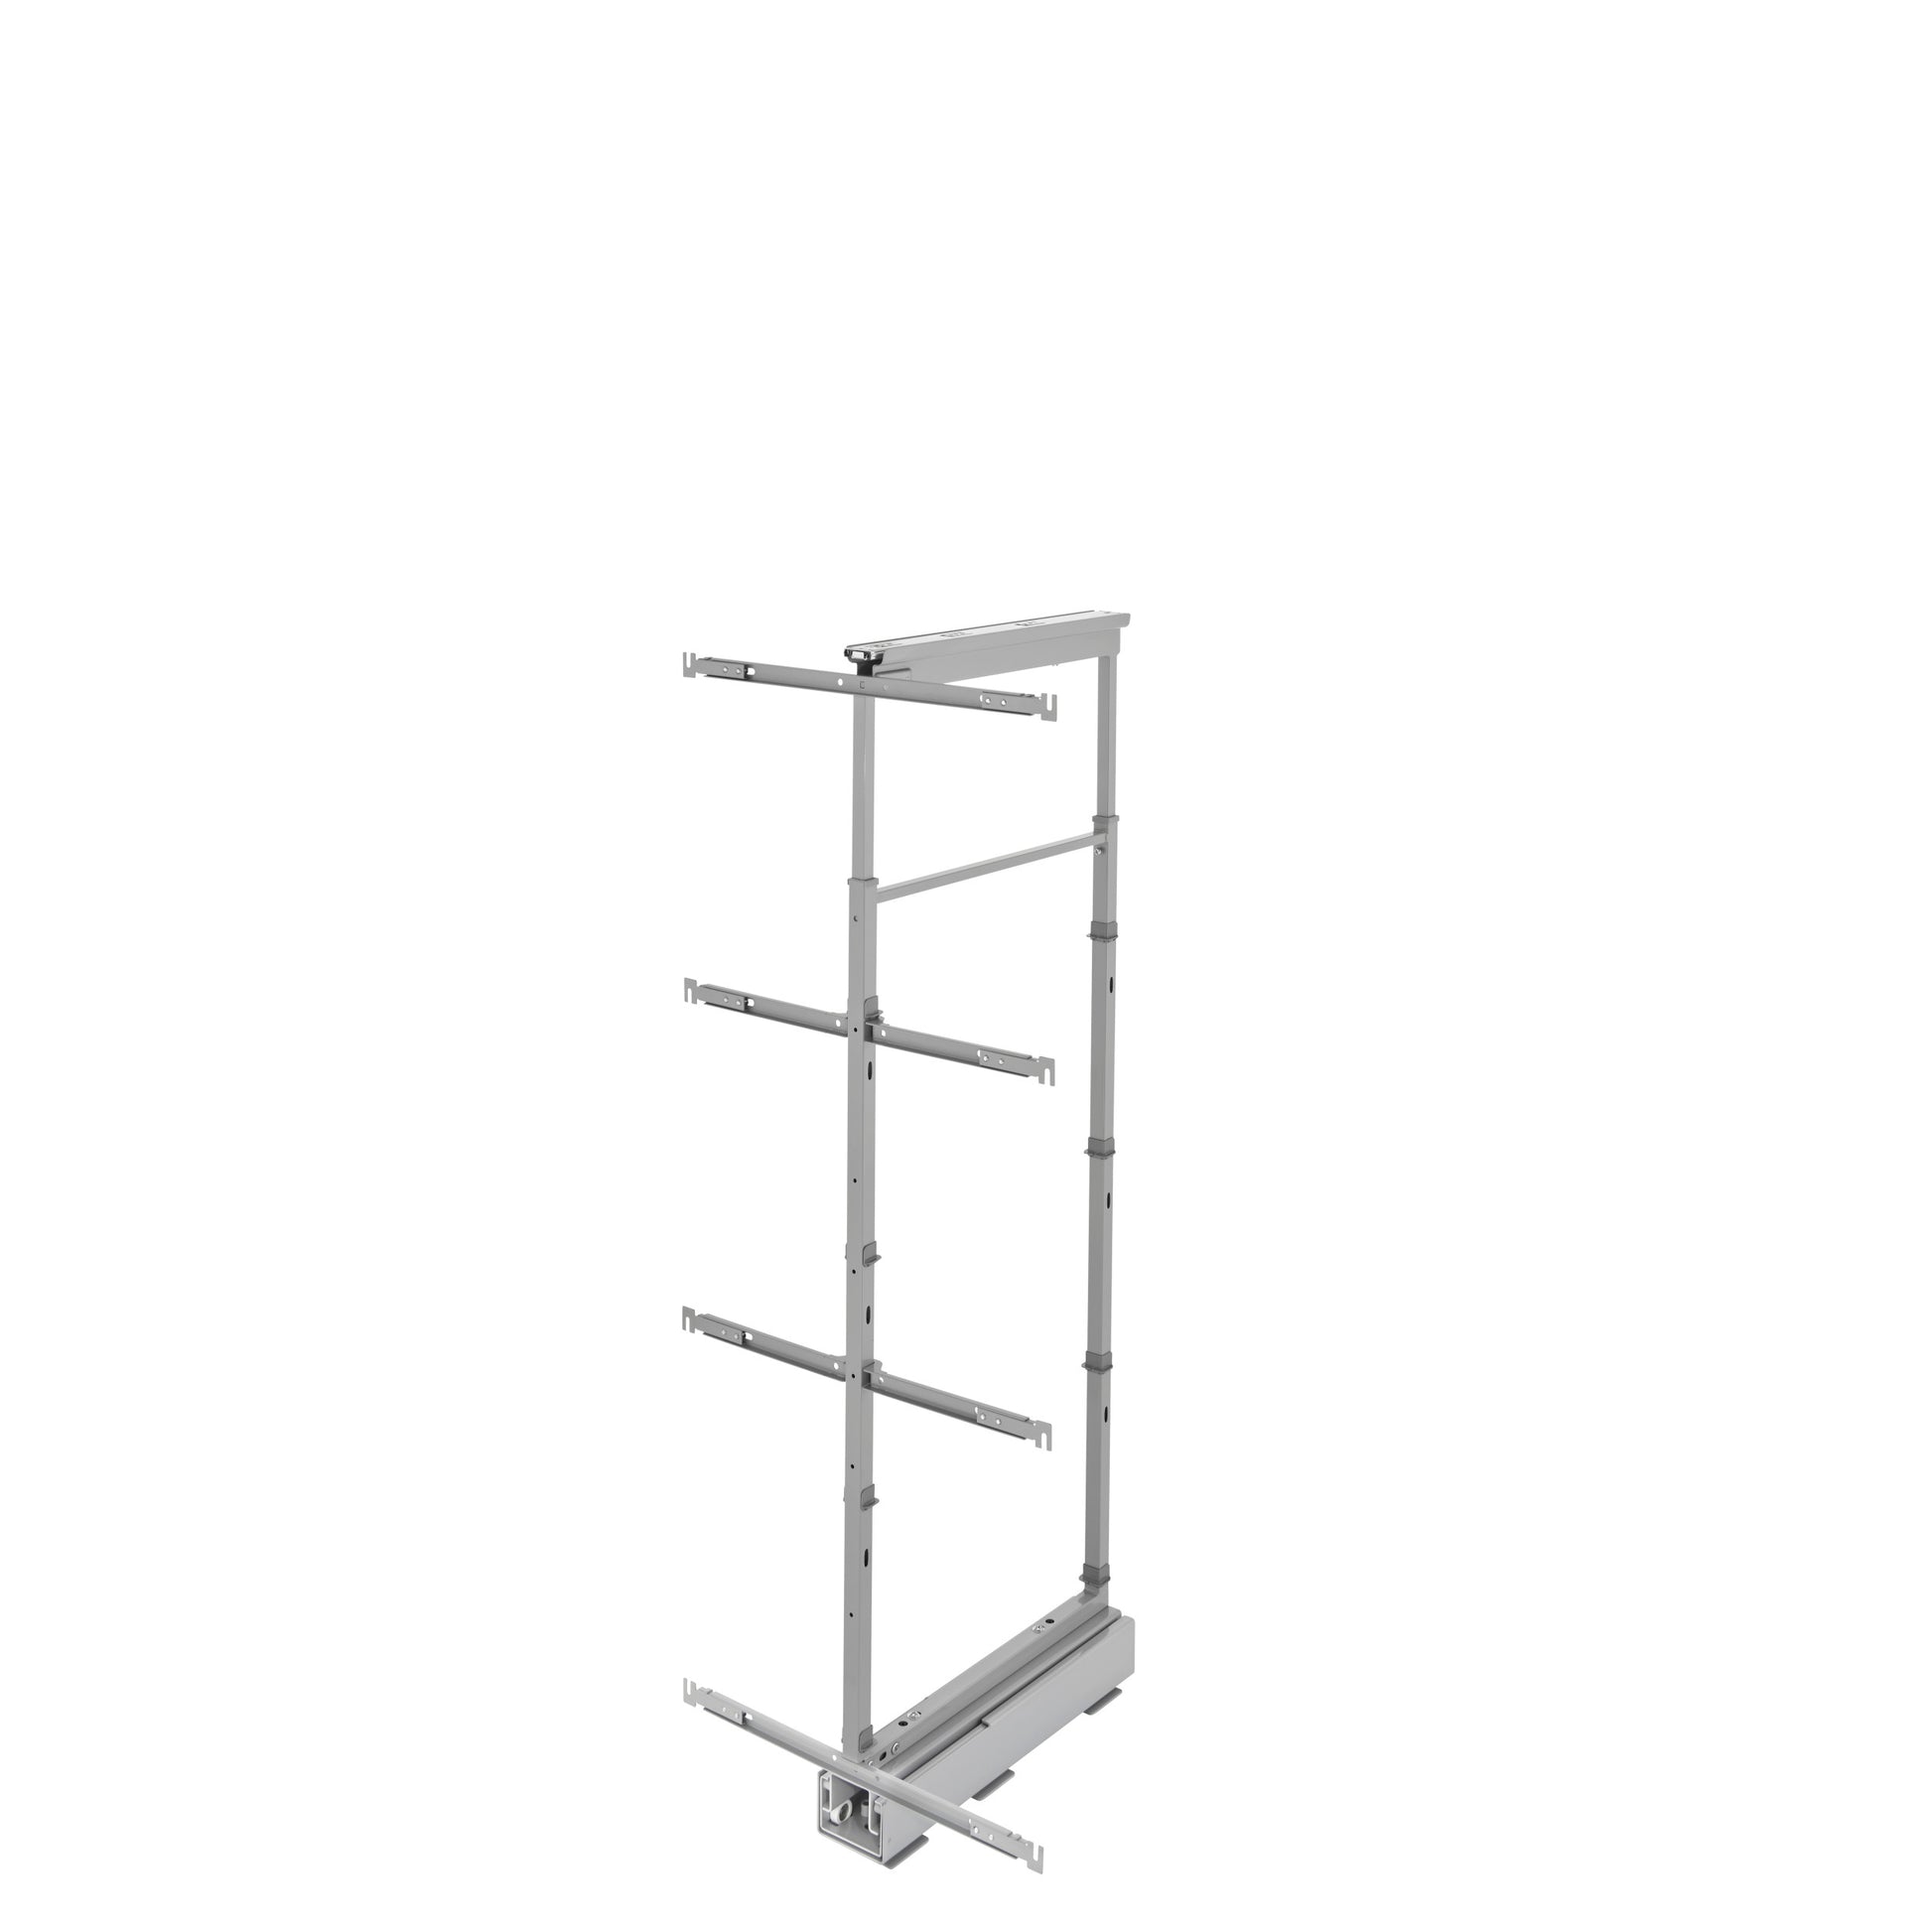 Rev-A-Shelf - Adjustable Solid Surface Pantry System for Tall Pantry Cabinets - 5350-19-GR